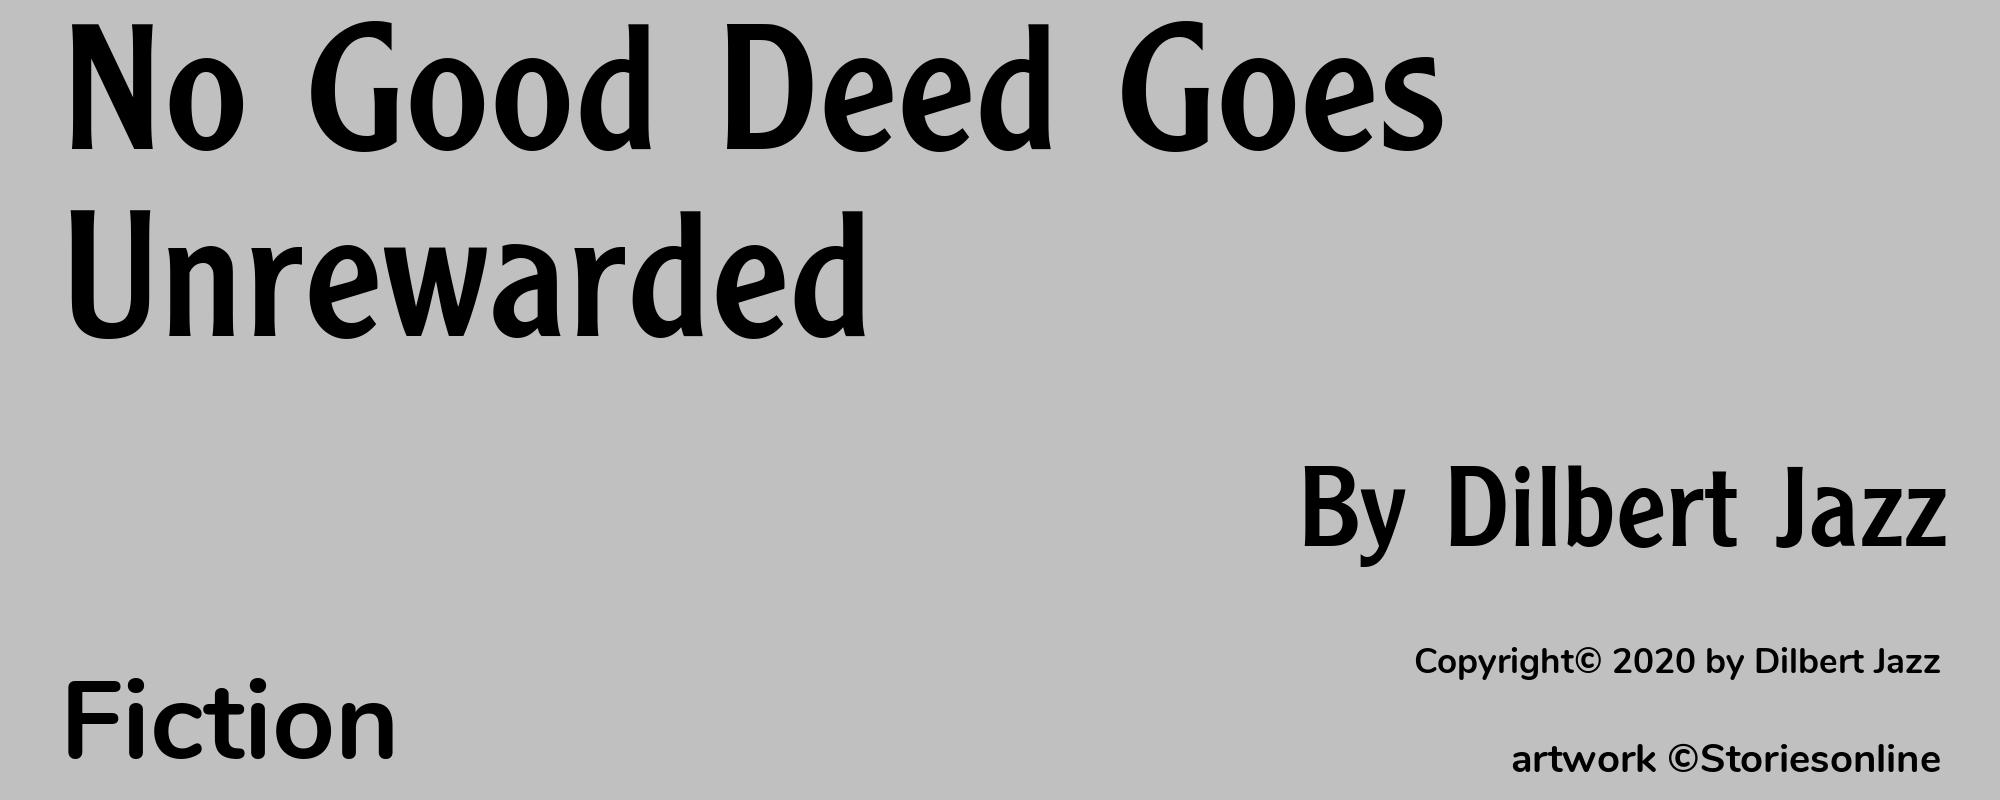 No Good Deed Goes Unrewarded - Cover